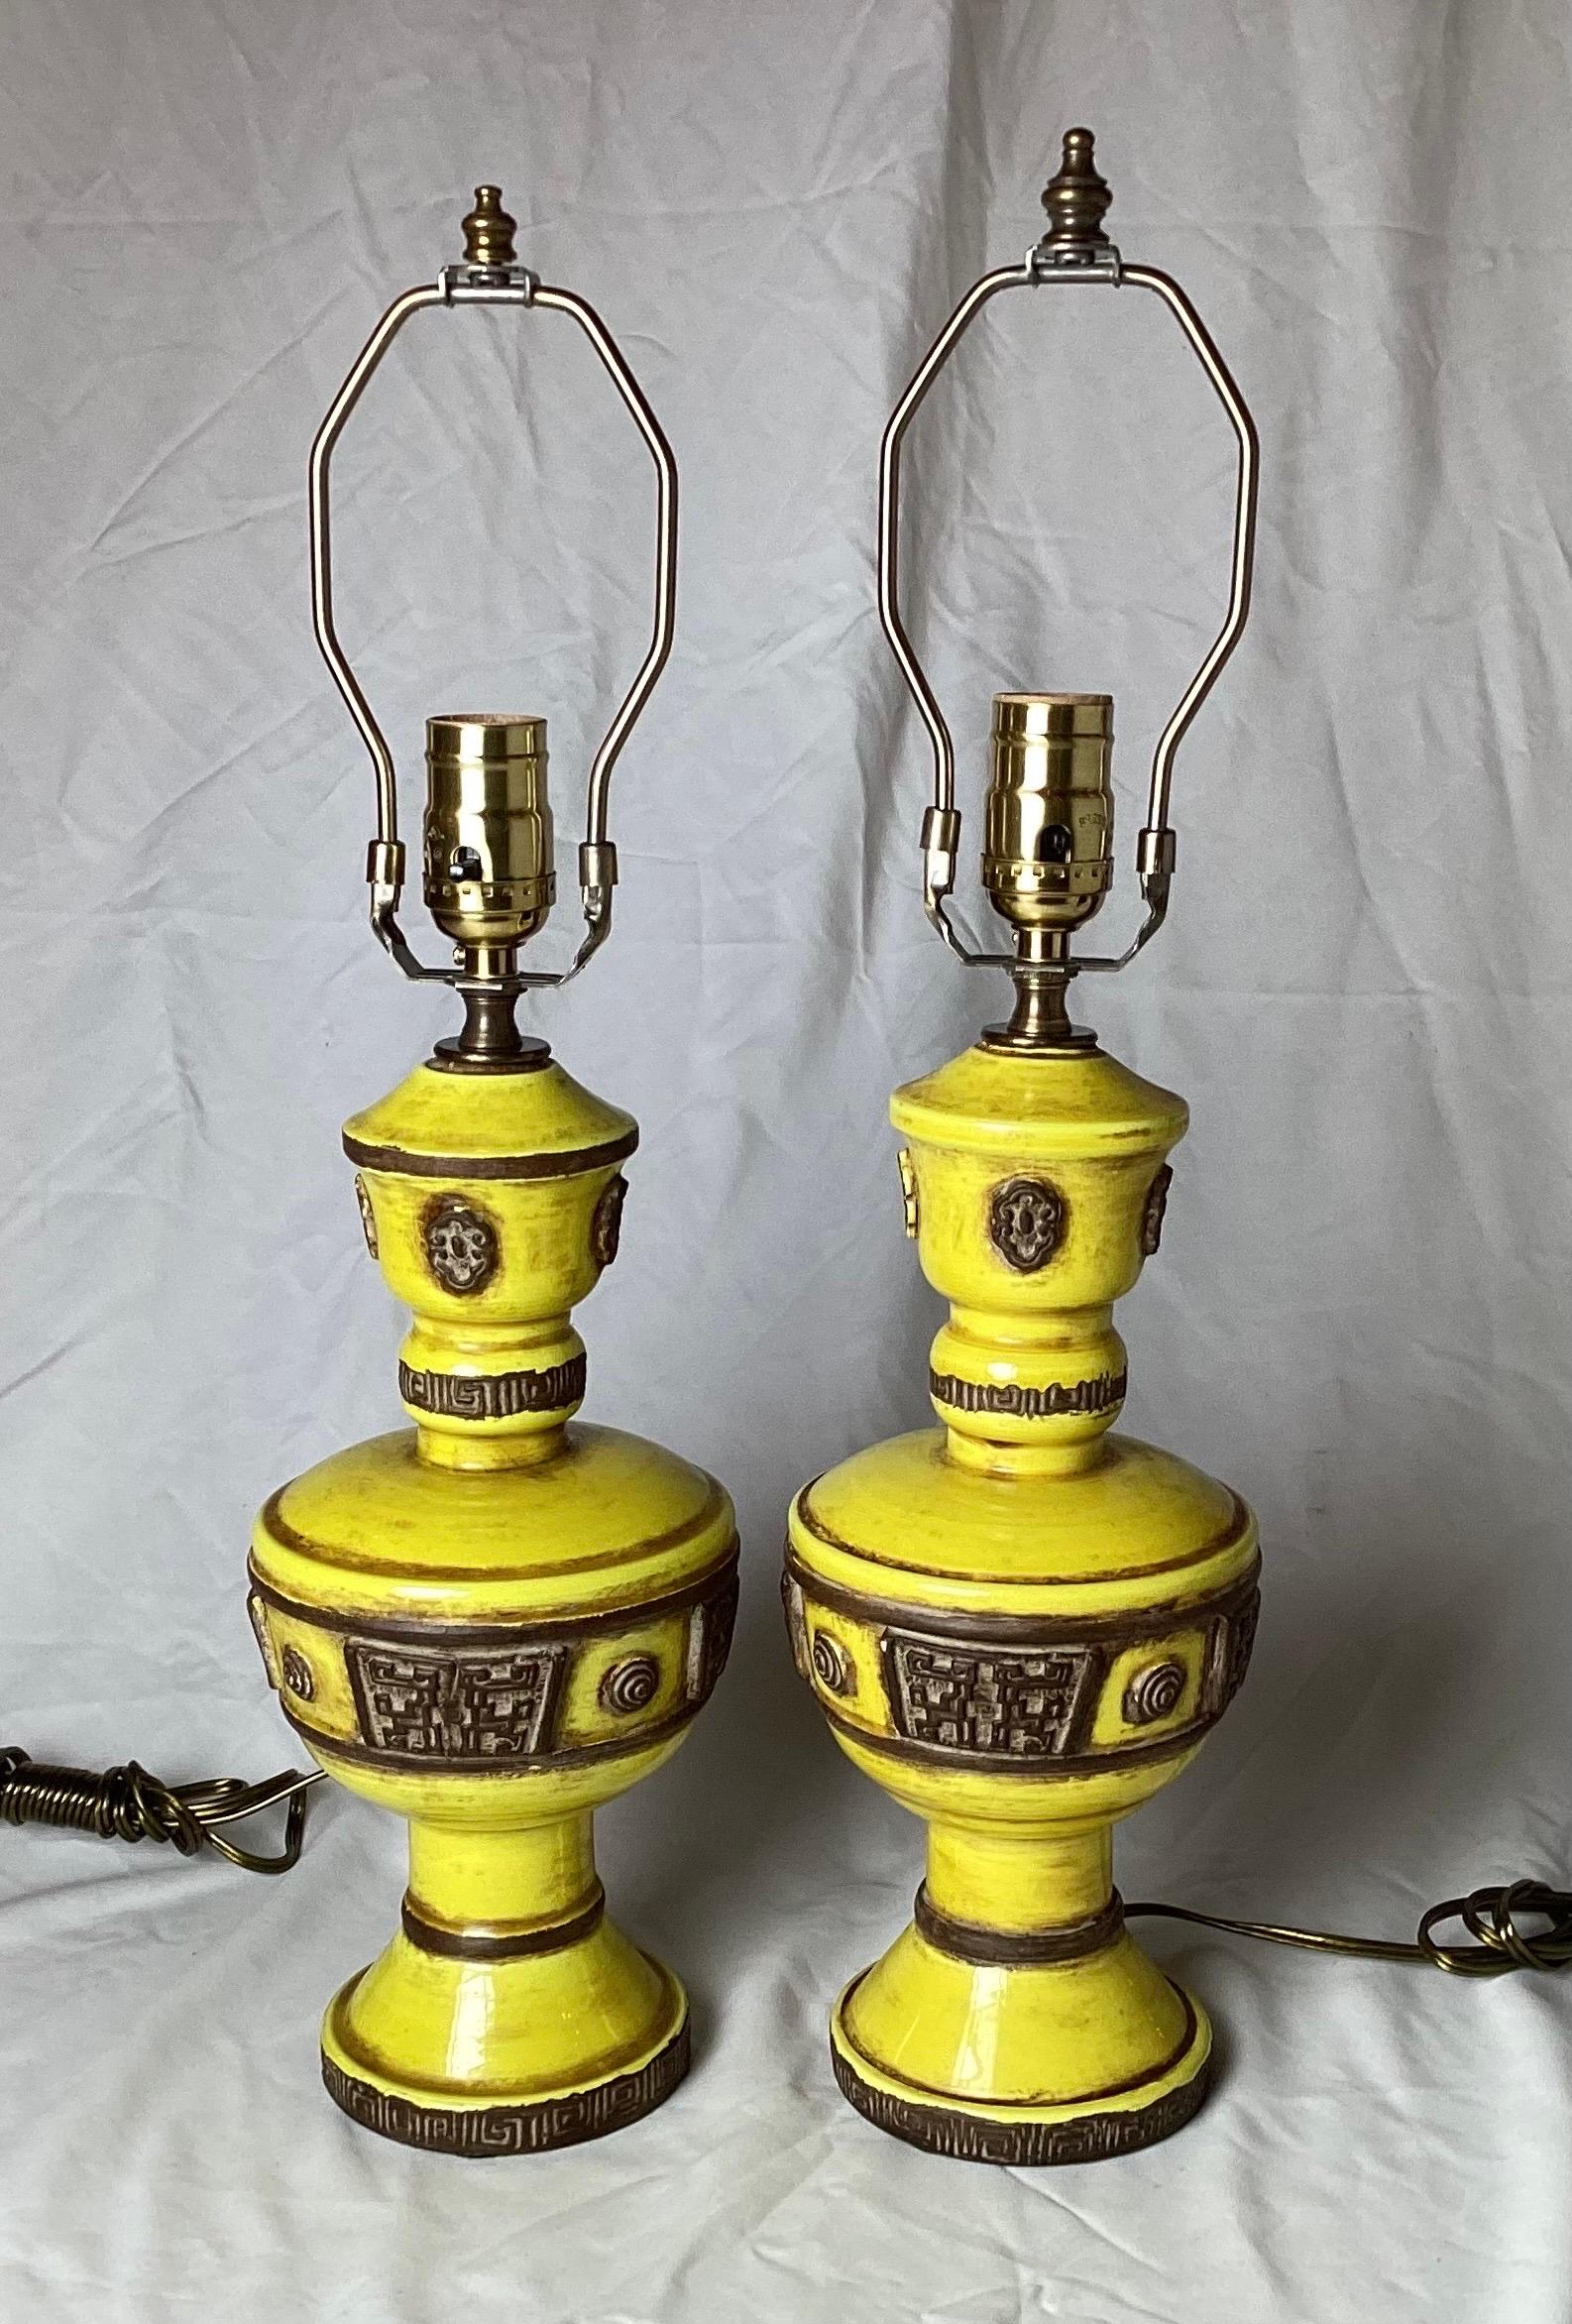 A stylish pair of Italian hand thrown pottery lamps with yellow glaze. The lamps with dark brown details with the Zaccagnini logo at the bottoms, 20 tall to the top of the harp, 11.5 to the top of the pottery.